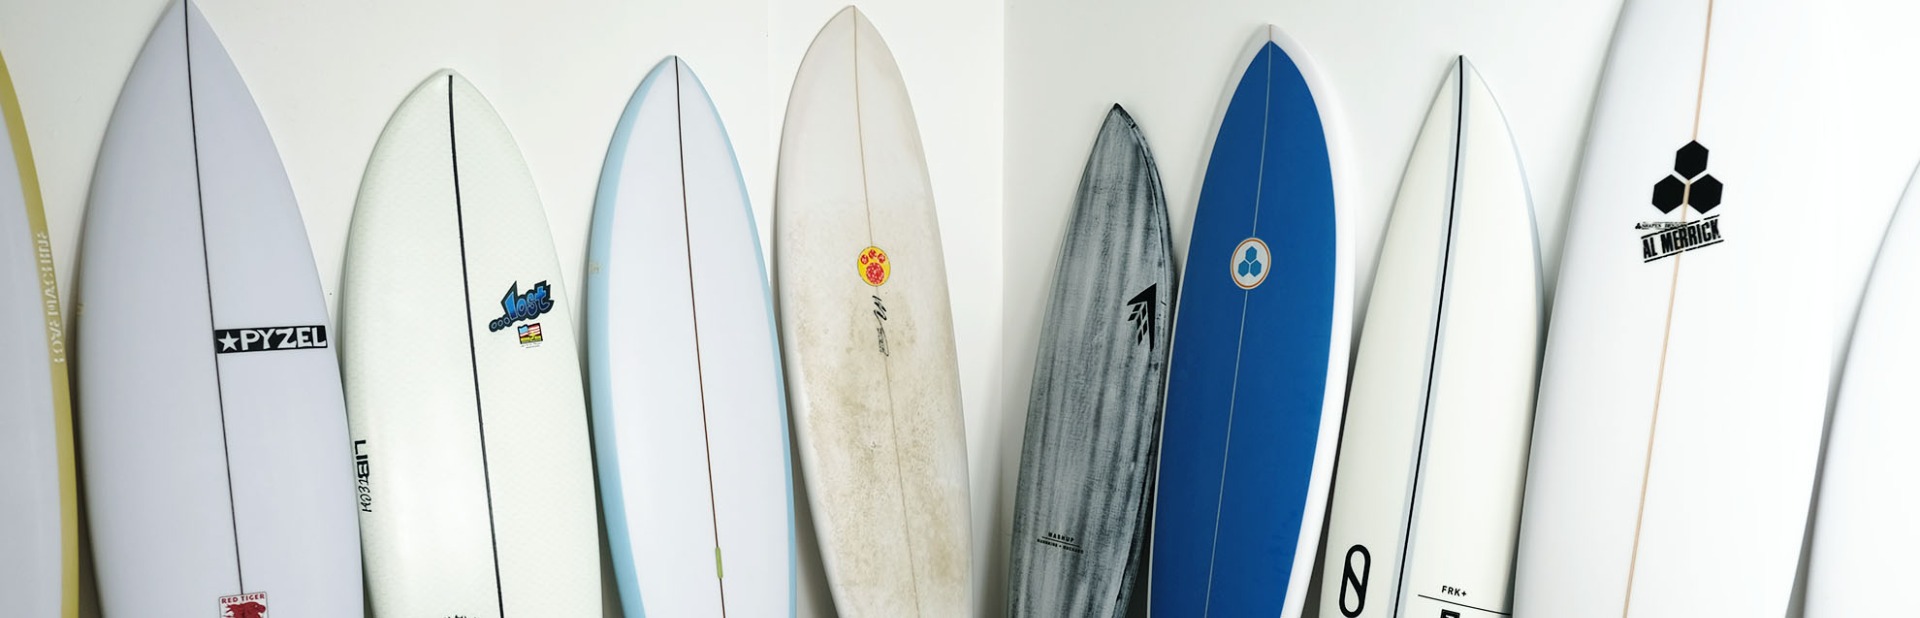 Top 10 Surfboards Of The Year